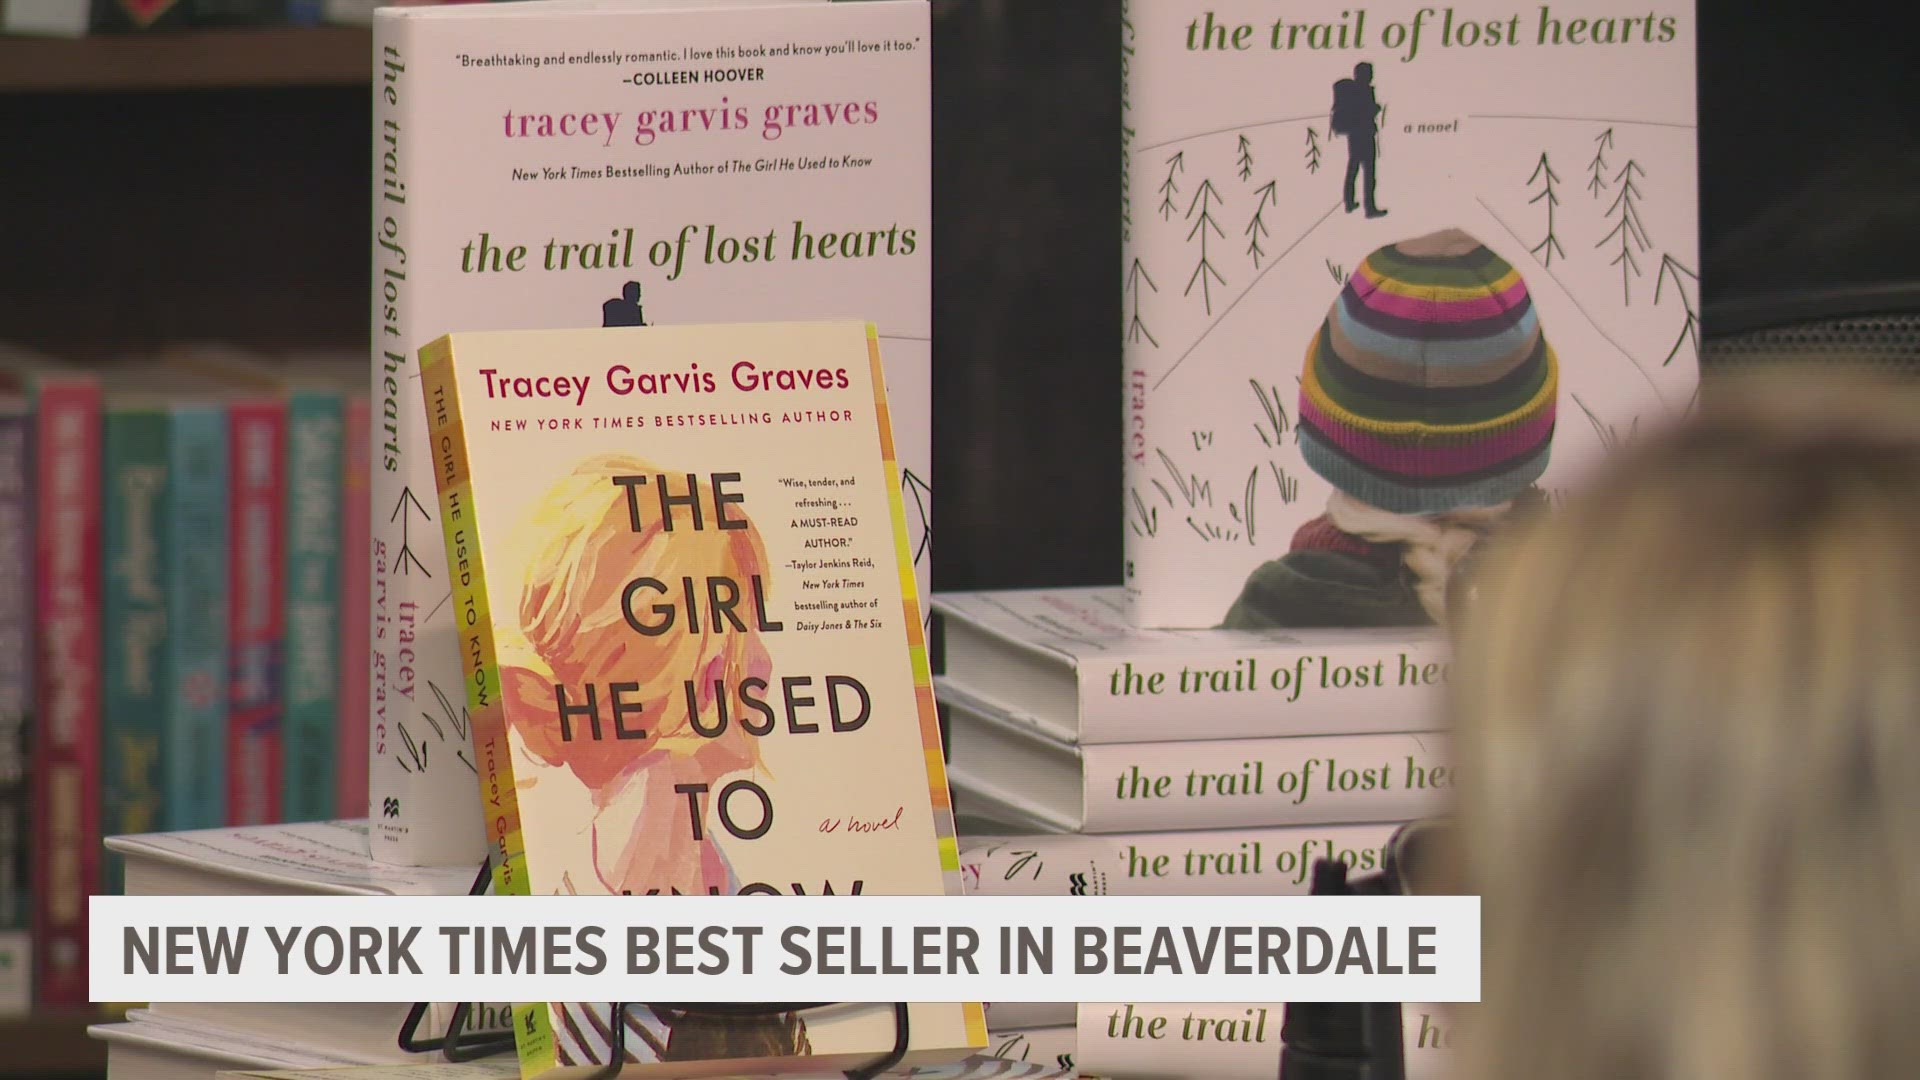 Tracey Garvis Graves' book is a story about romance, adventure and overcoming hardships.